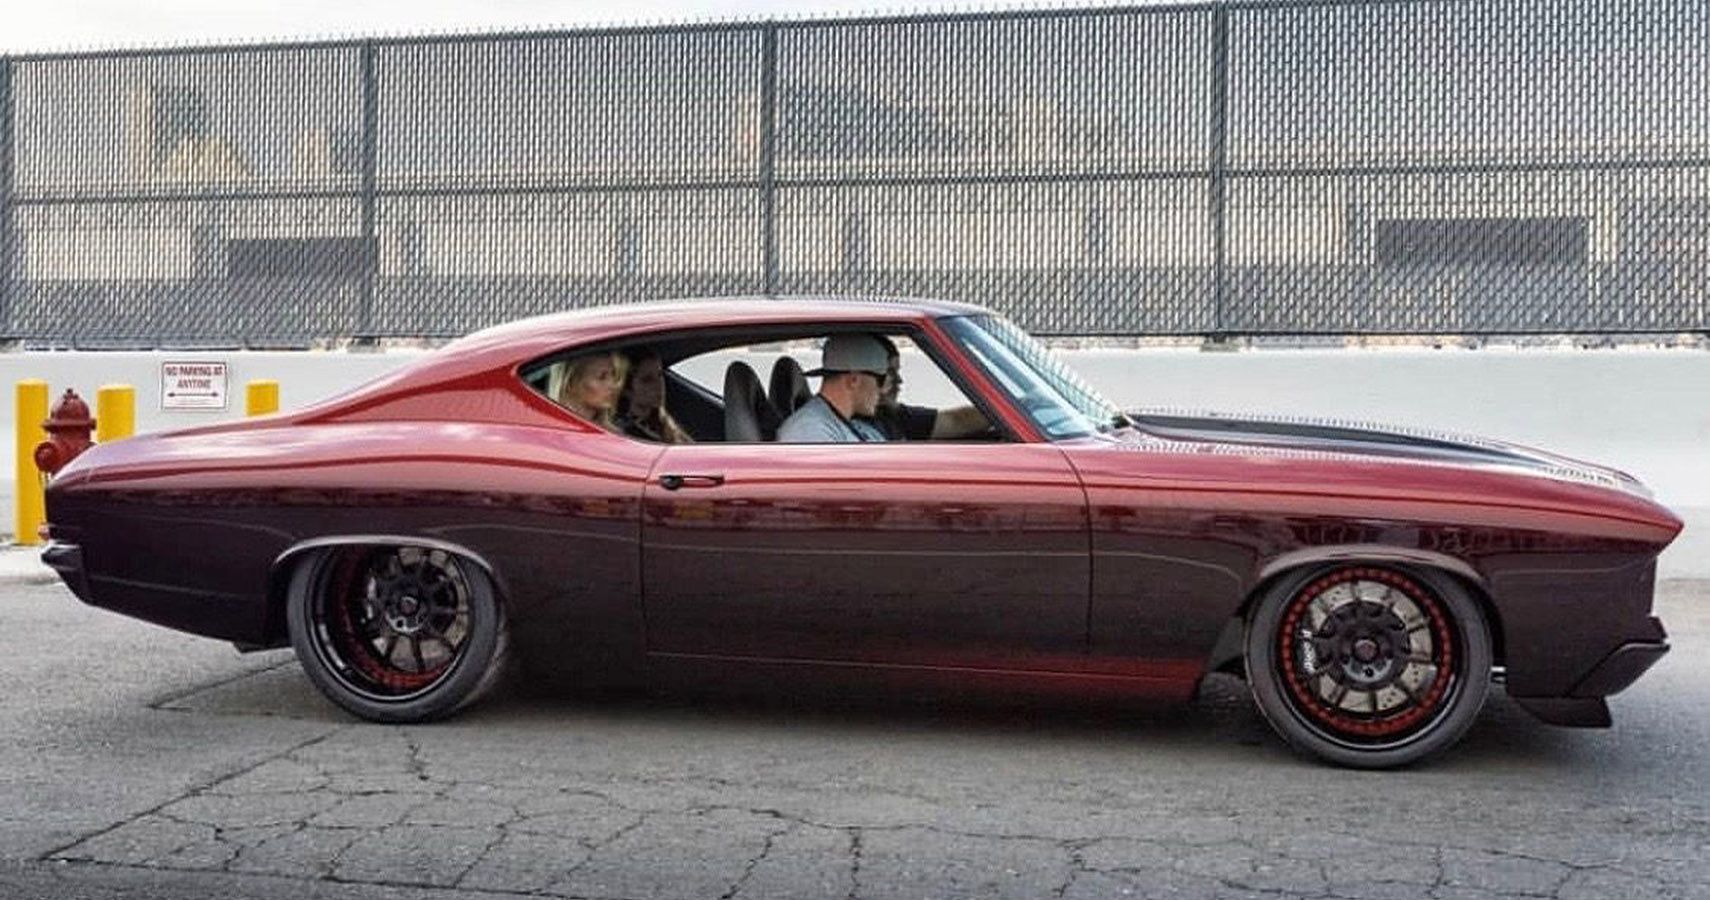 When In Doubt, Go With Cherry Chevelle